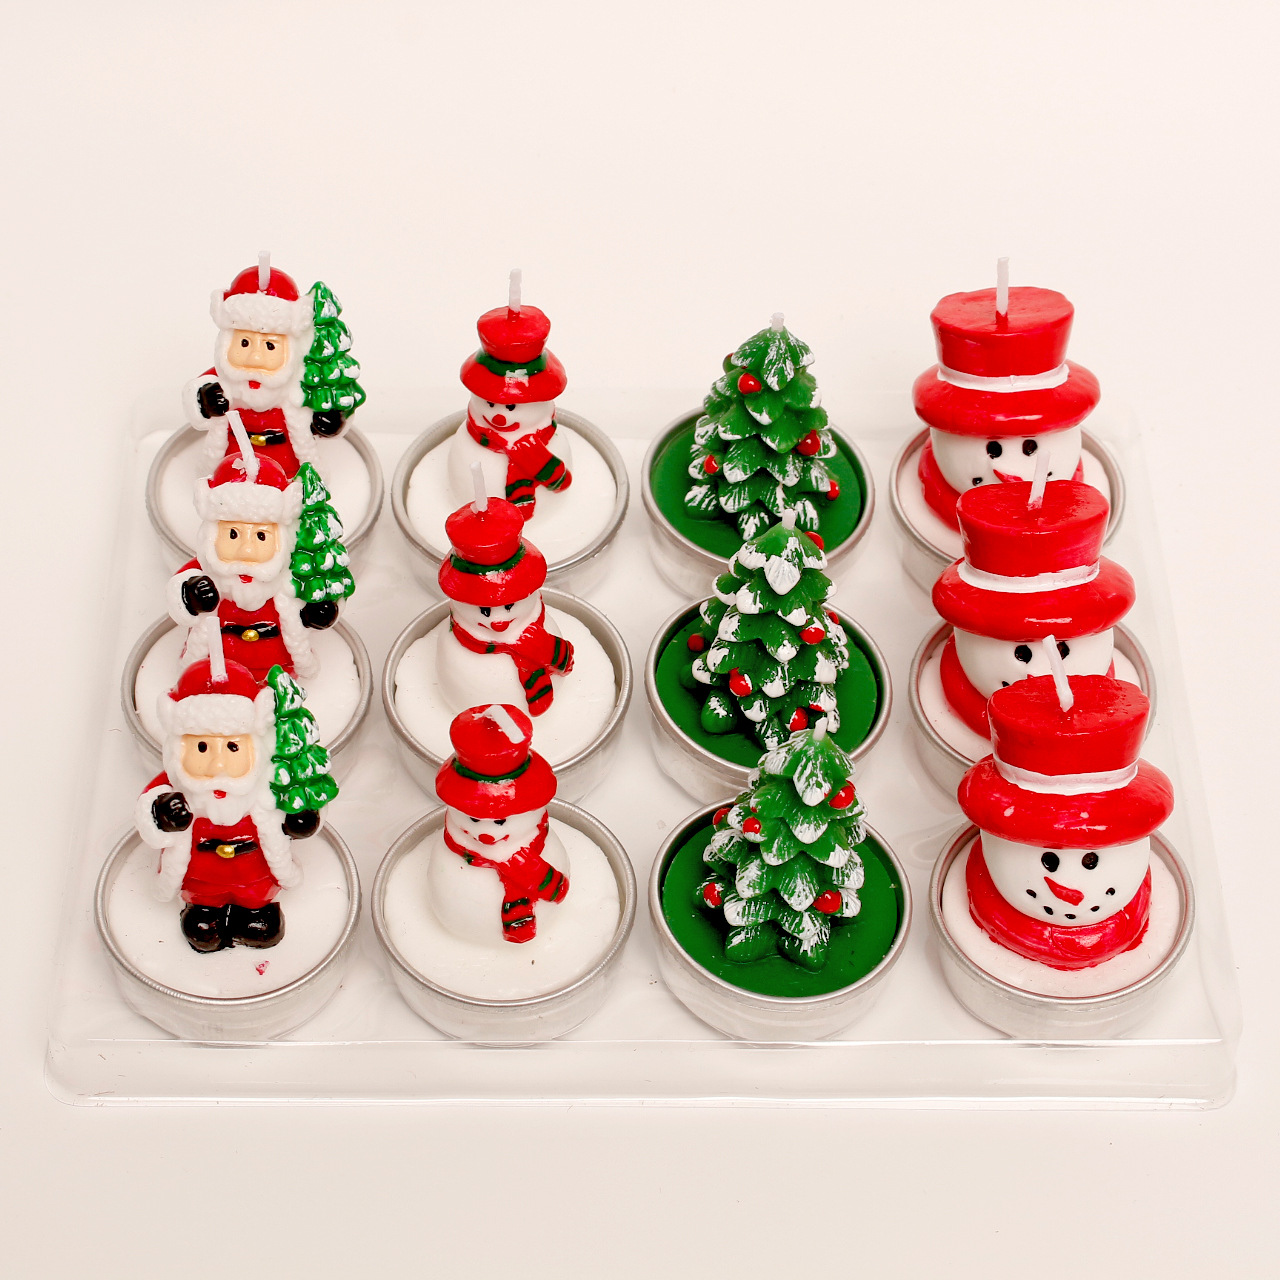 12 Gift Set Christmas Candles Craft Painted Aluminum Case Snowman Old Man Christmas Tree Tealight Birthday Candles